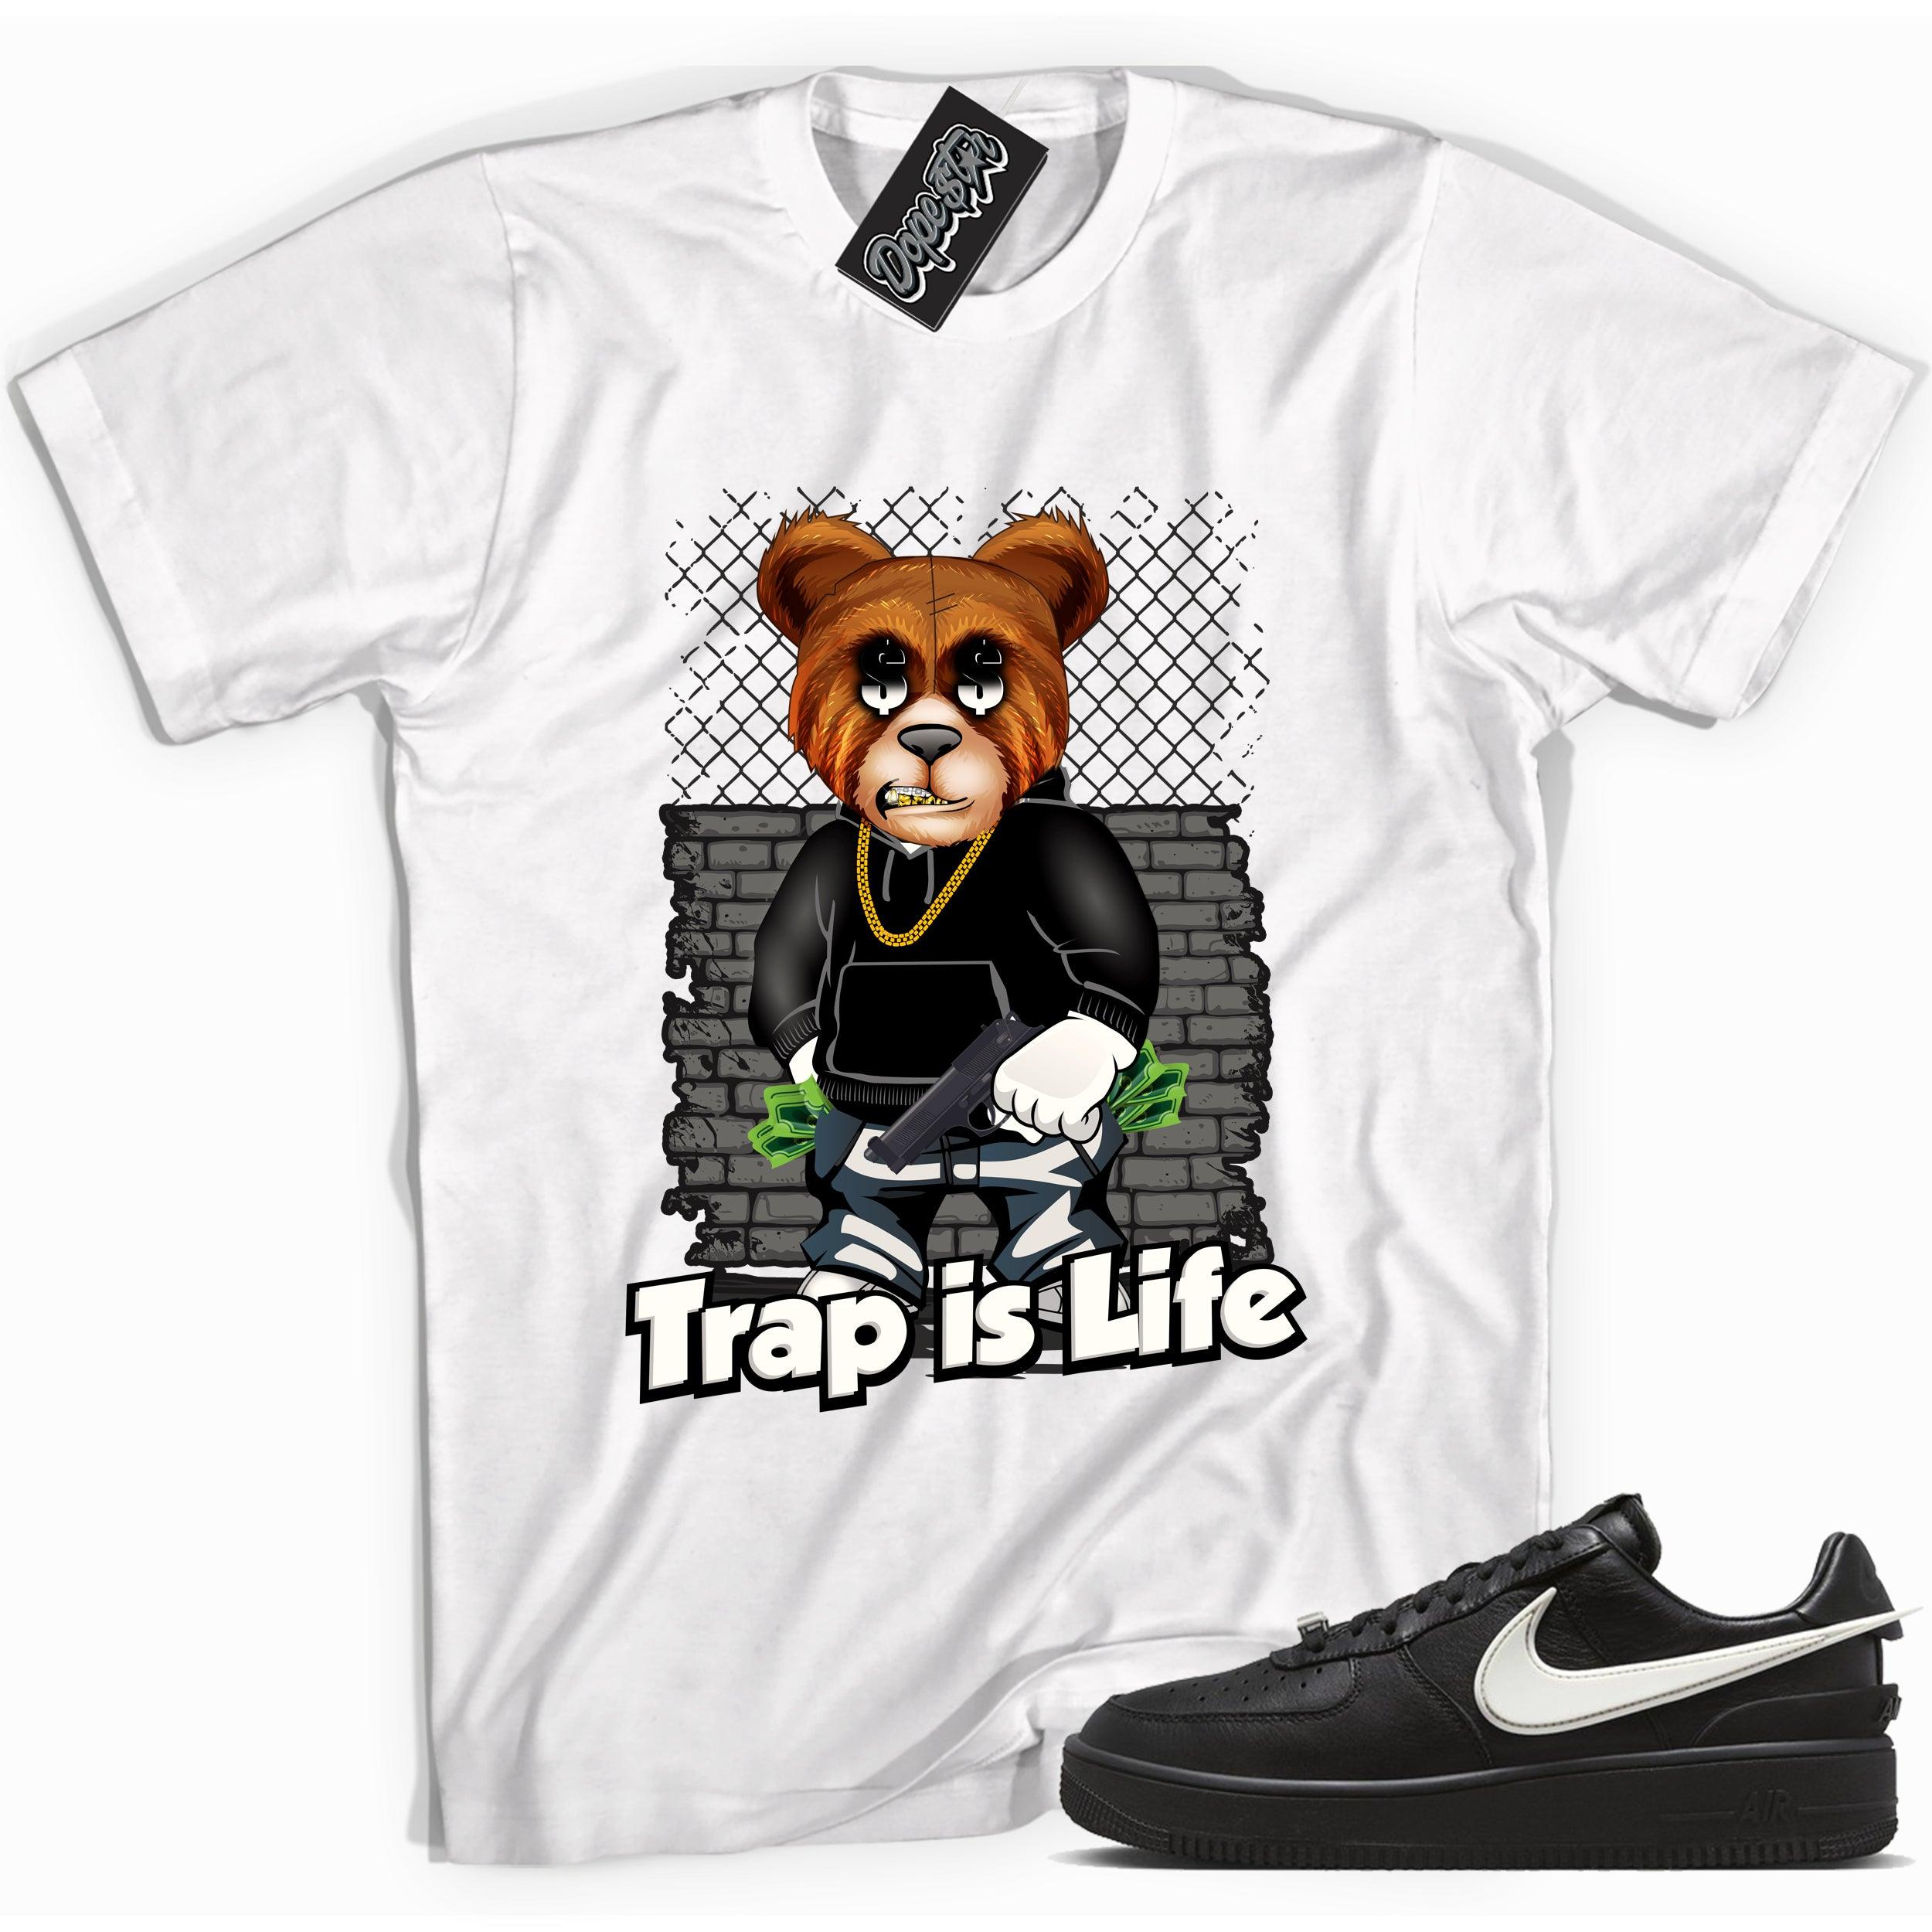 Cool white graphic tee with 'trap is life' print, that perfectly matches Nike Air Force 1 Low Ambush Phantom Black sneakers